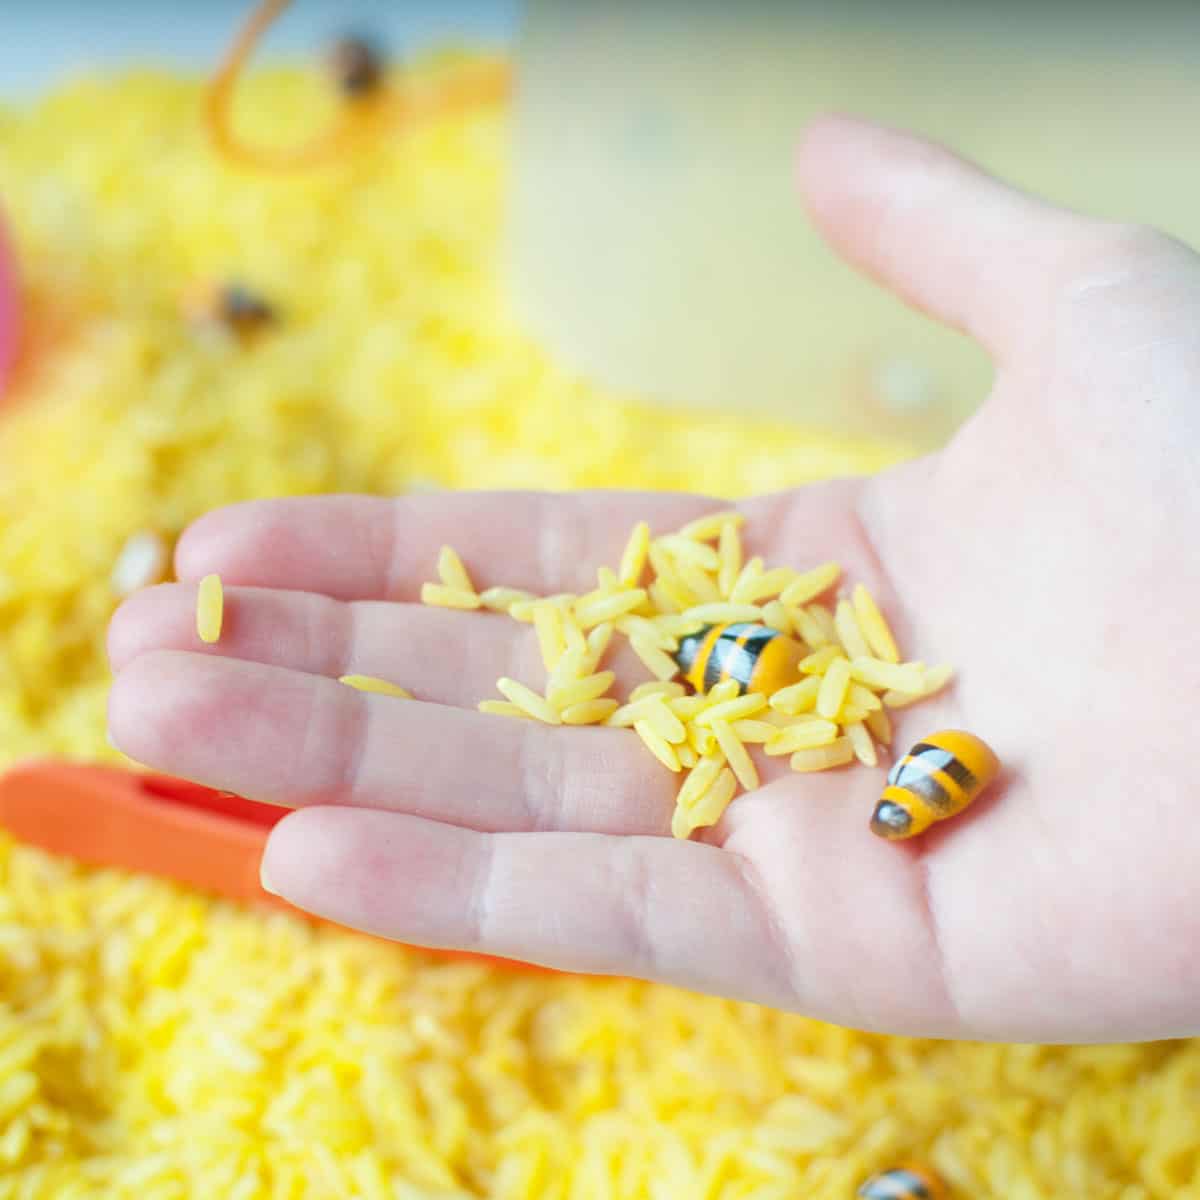 A young child's hand holding some of the rice and small bees from the sensory bin.